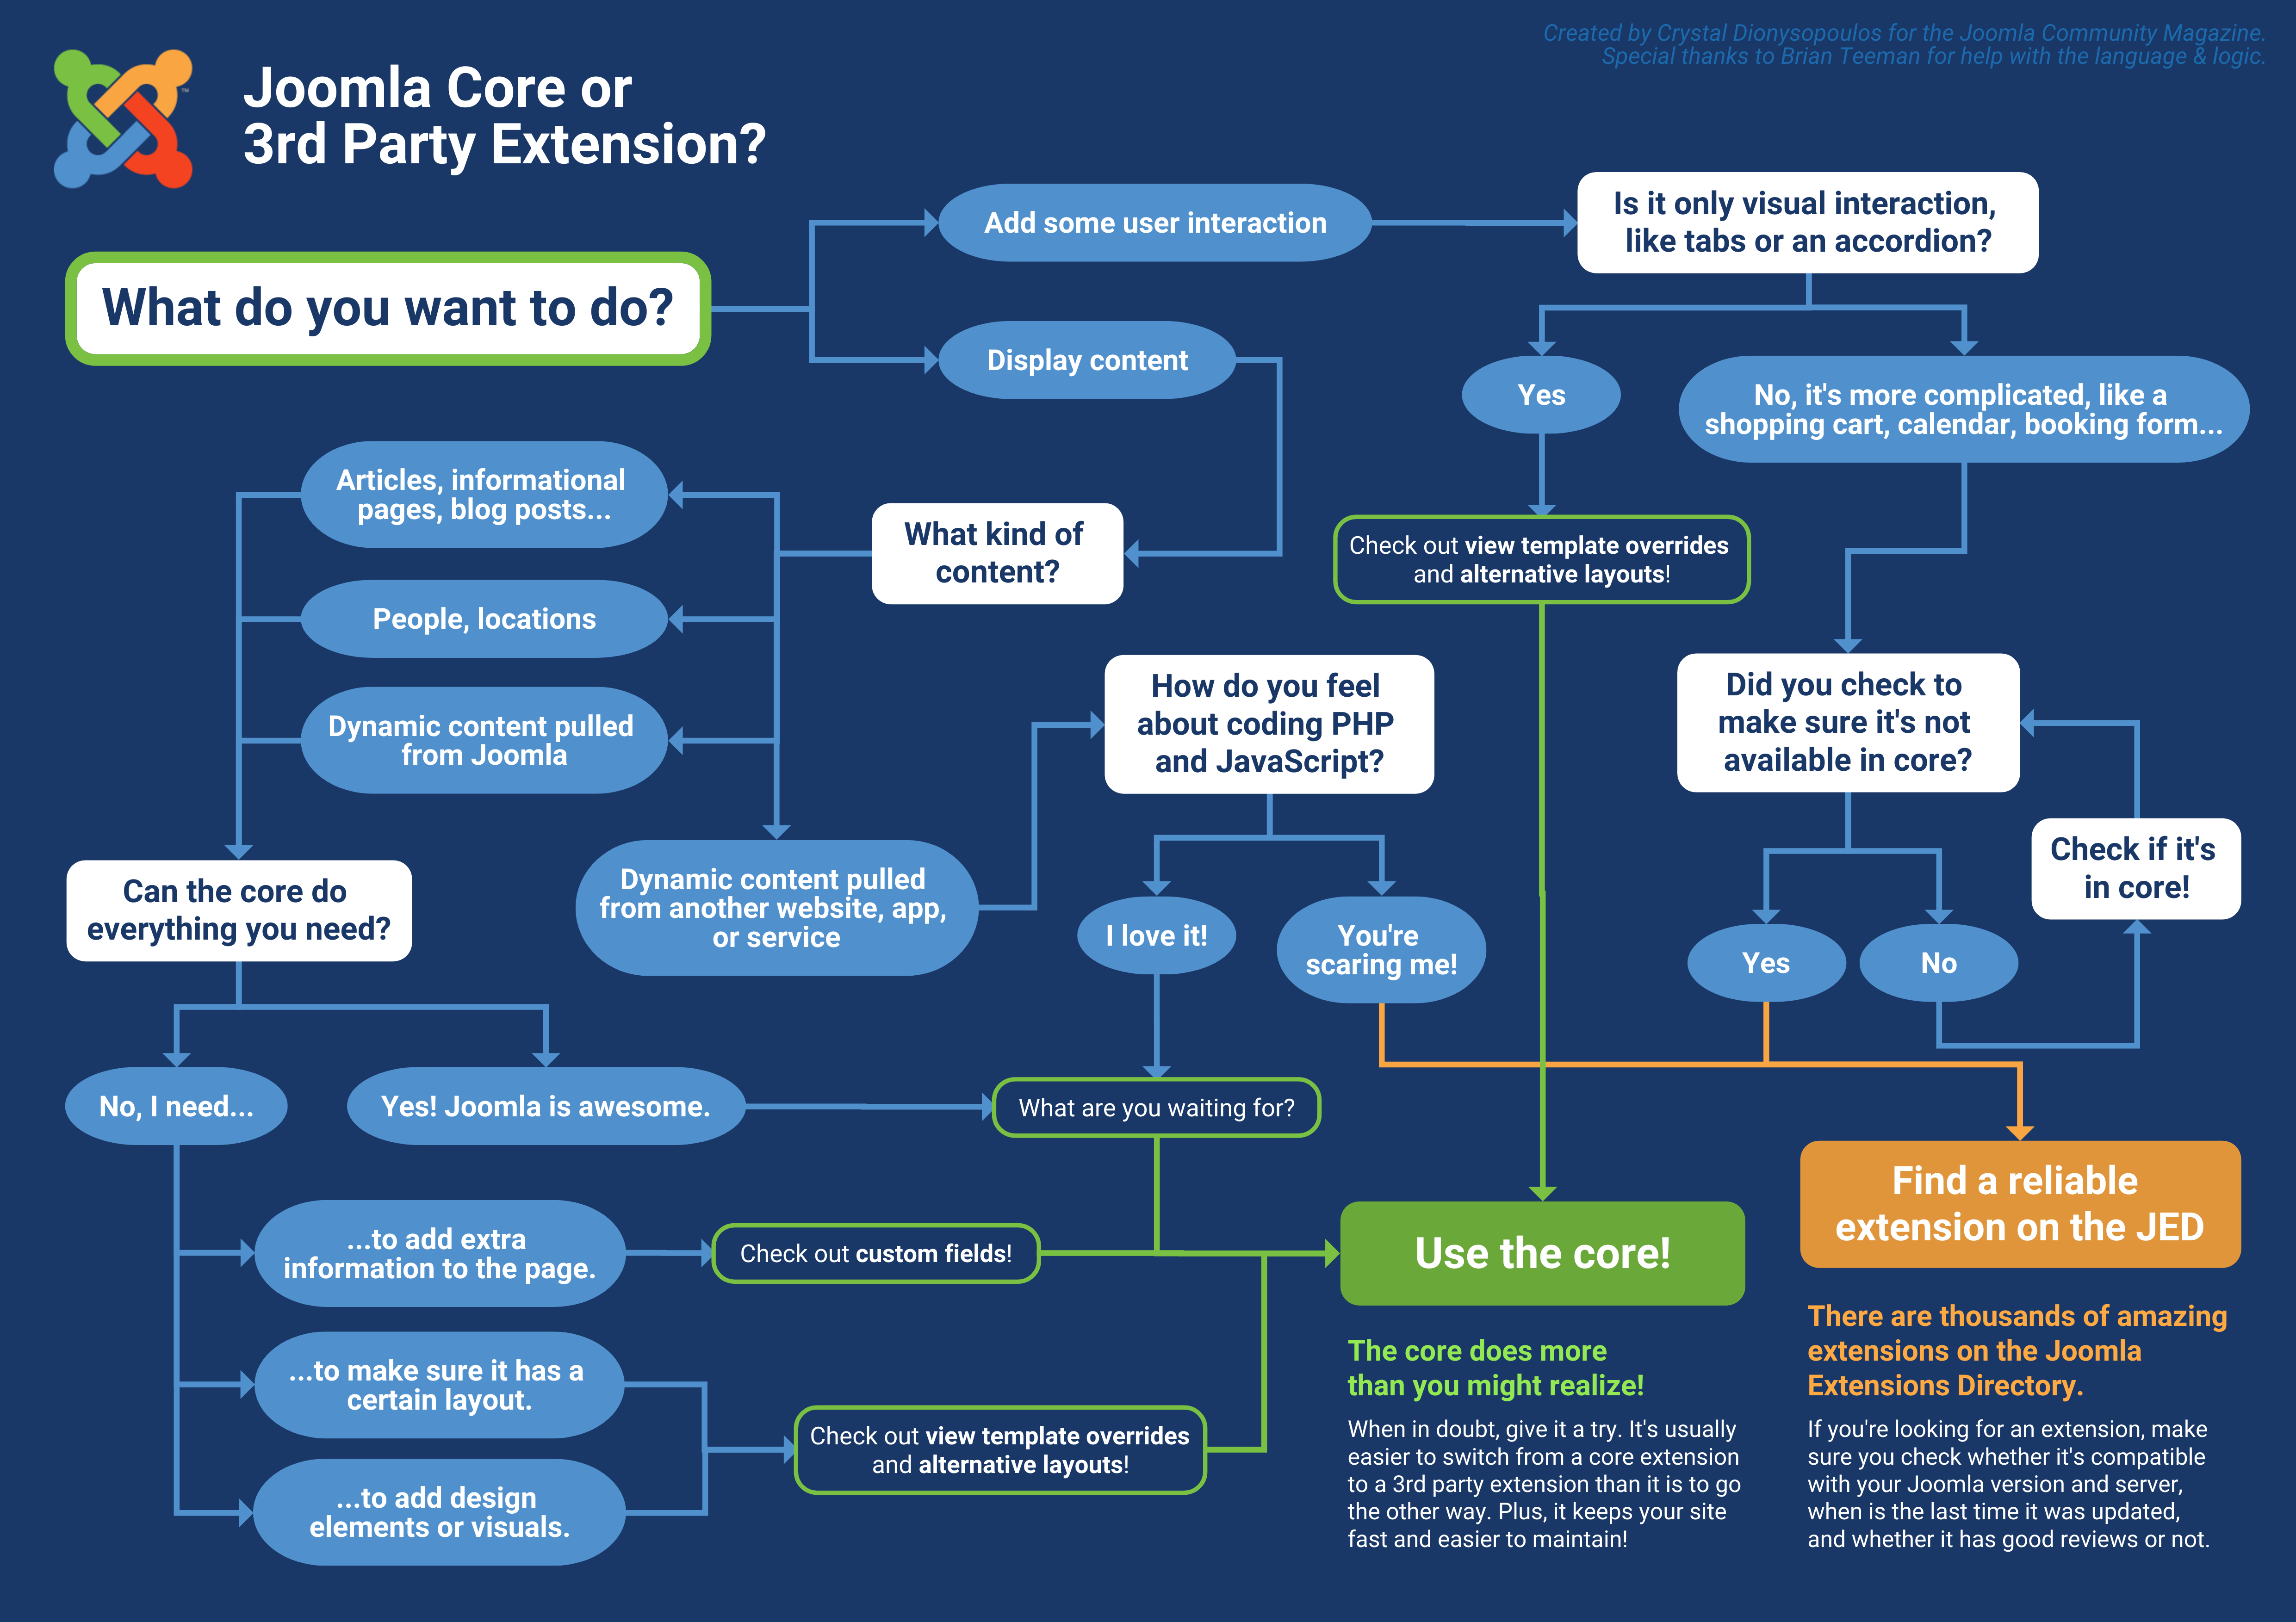 A flowchart showing the decision process for using the Joomla Core or finding a 3rd party extension. The process will be detailed below this image as well.